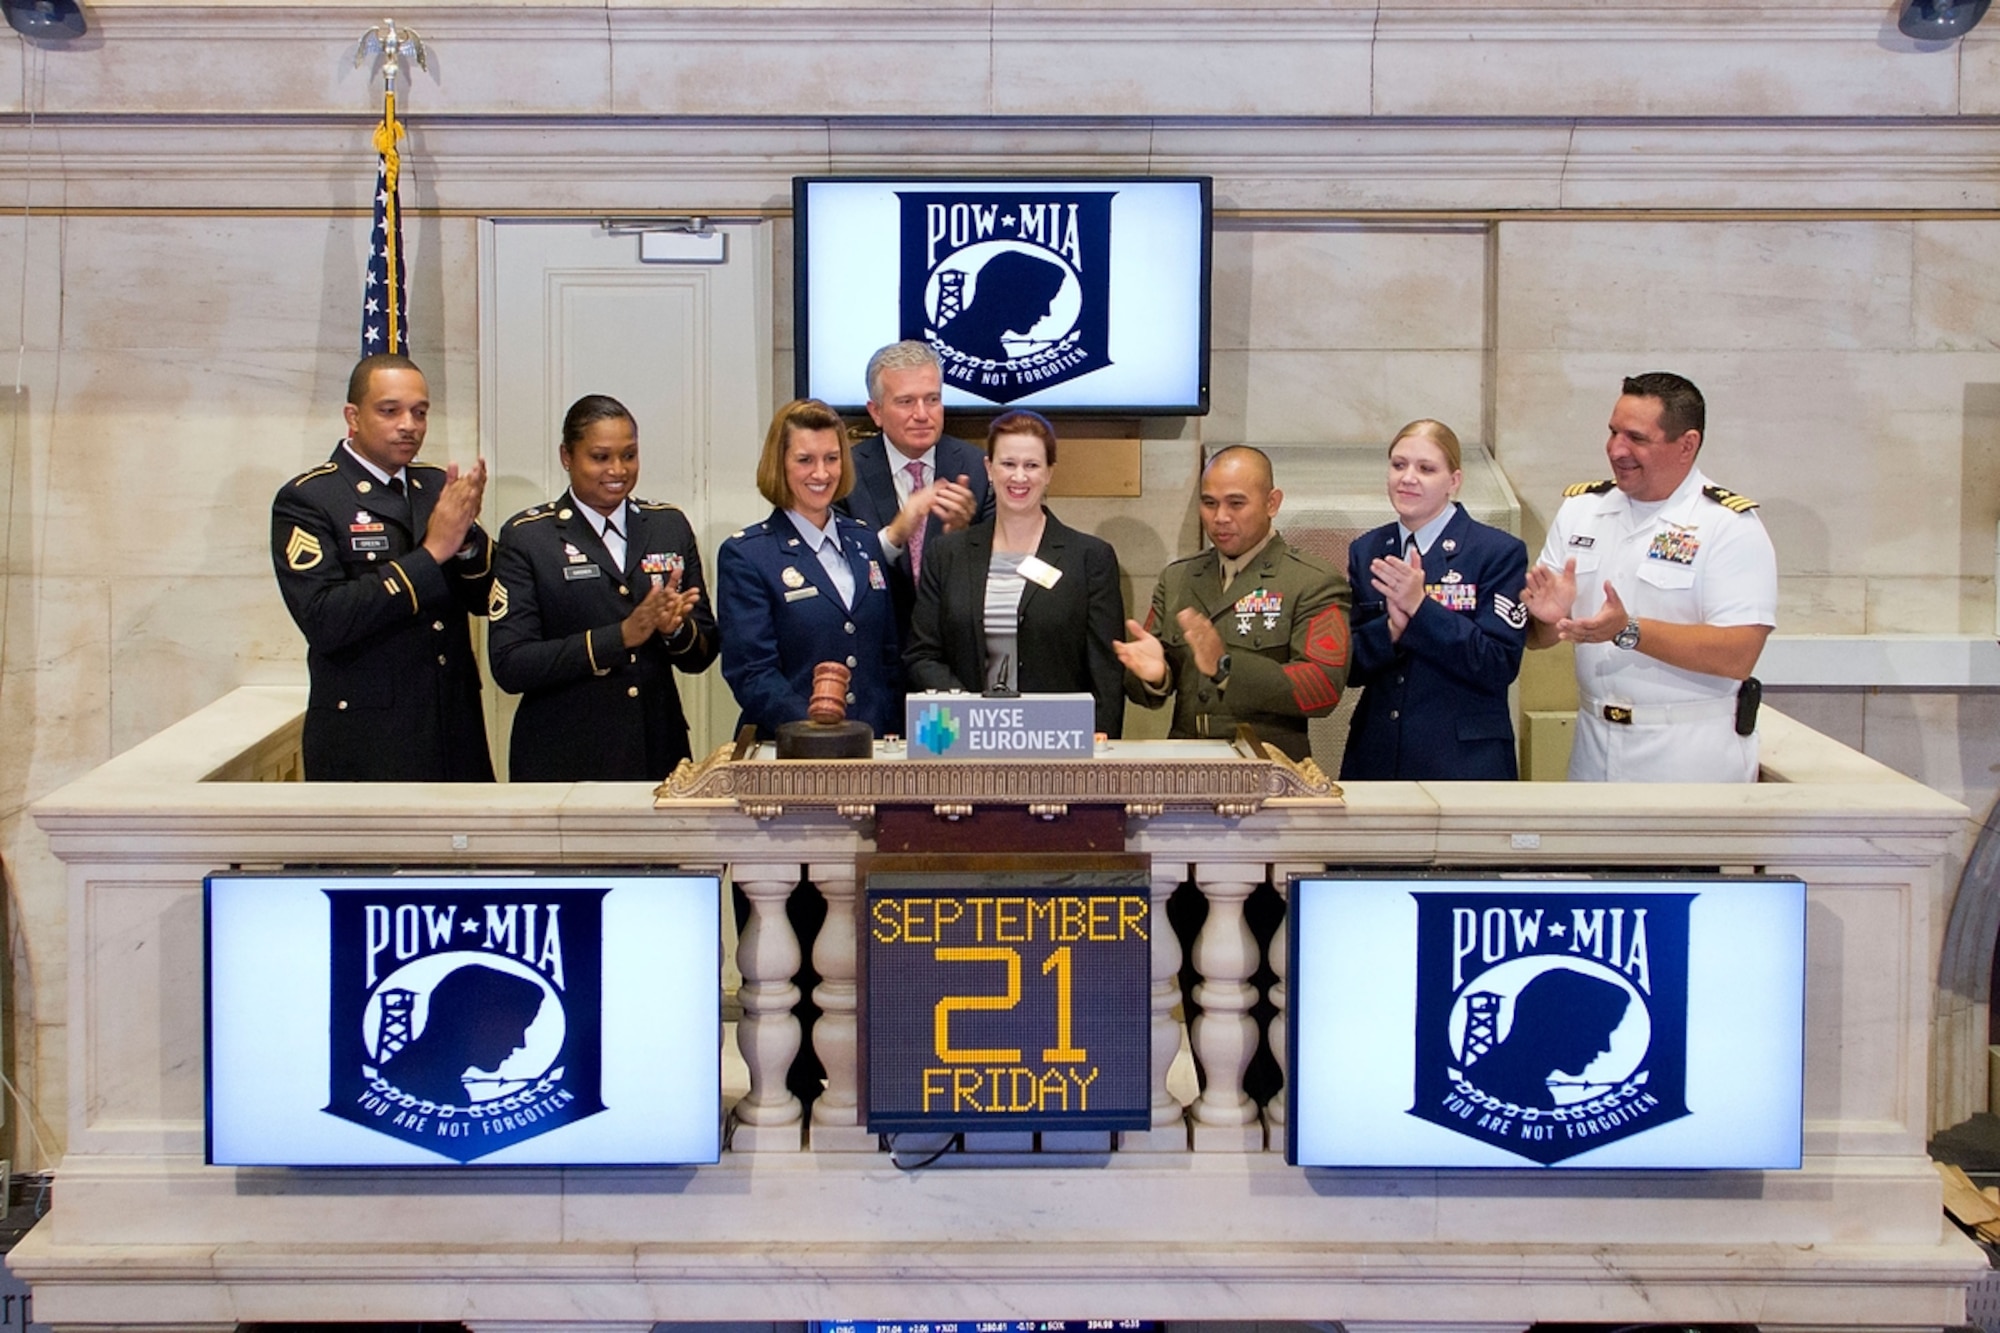 Principal Director of the Defense POW/Missing Personnel Office Ms. Alisa Stack, (center) rings the Closing Bell at the New York Stock Exchange, with Army Staff Sgt. Joseph A. Green, III, (from right to left) Army Sgt. 1st Class Alethea R. Gardner, Air Force Maj. Carie A. Parker, Marine Gunnery Sgt Harlan R. Calilao, Air Force Staff Sgt. Danielle L. Harris, and Navy CDR David J. Mendez to commemorate National POW/MIA Recognition Day on Sept. 21 with  NYSE CEO Duncan  Niederauer (back). (Photo courtesy of Defense Prisoner of War/Missing Personnel Office Public Affairs)